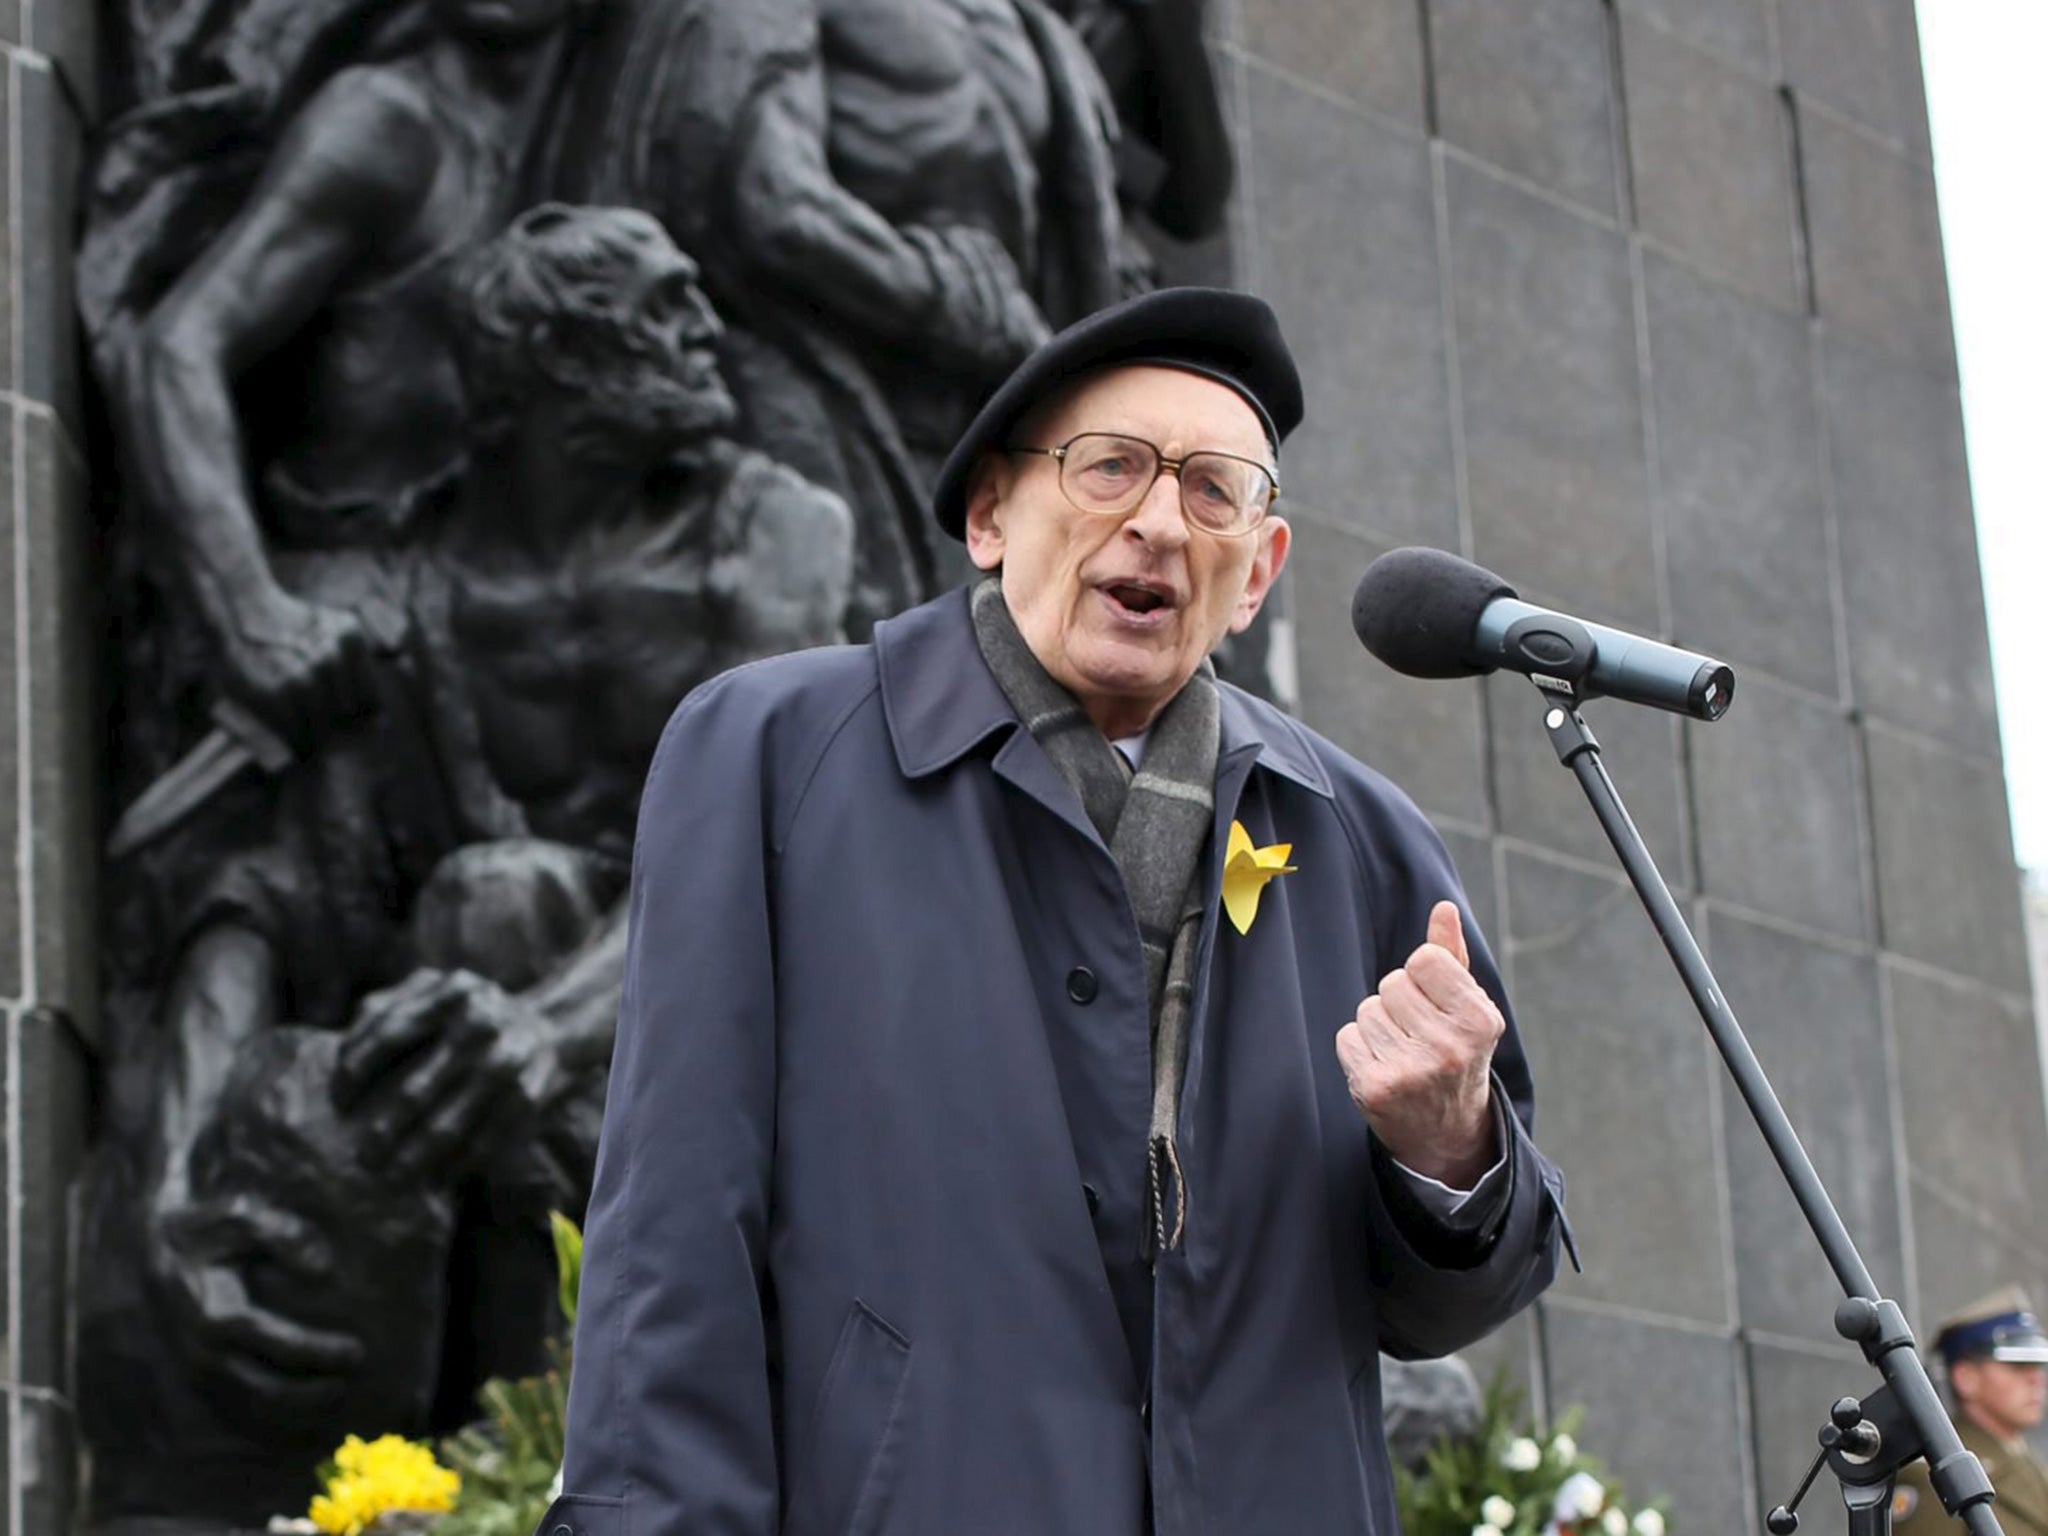 Bartoszewski speaks a few days before his death, at a ceremony to mark the Warsaw Uprising